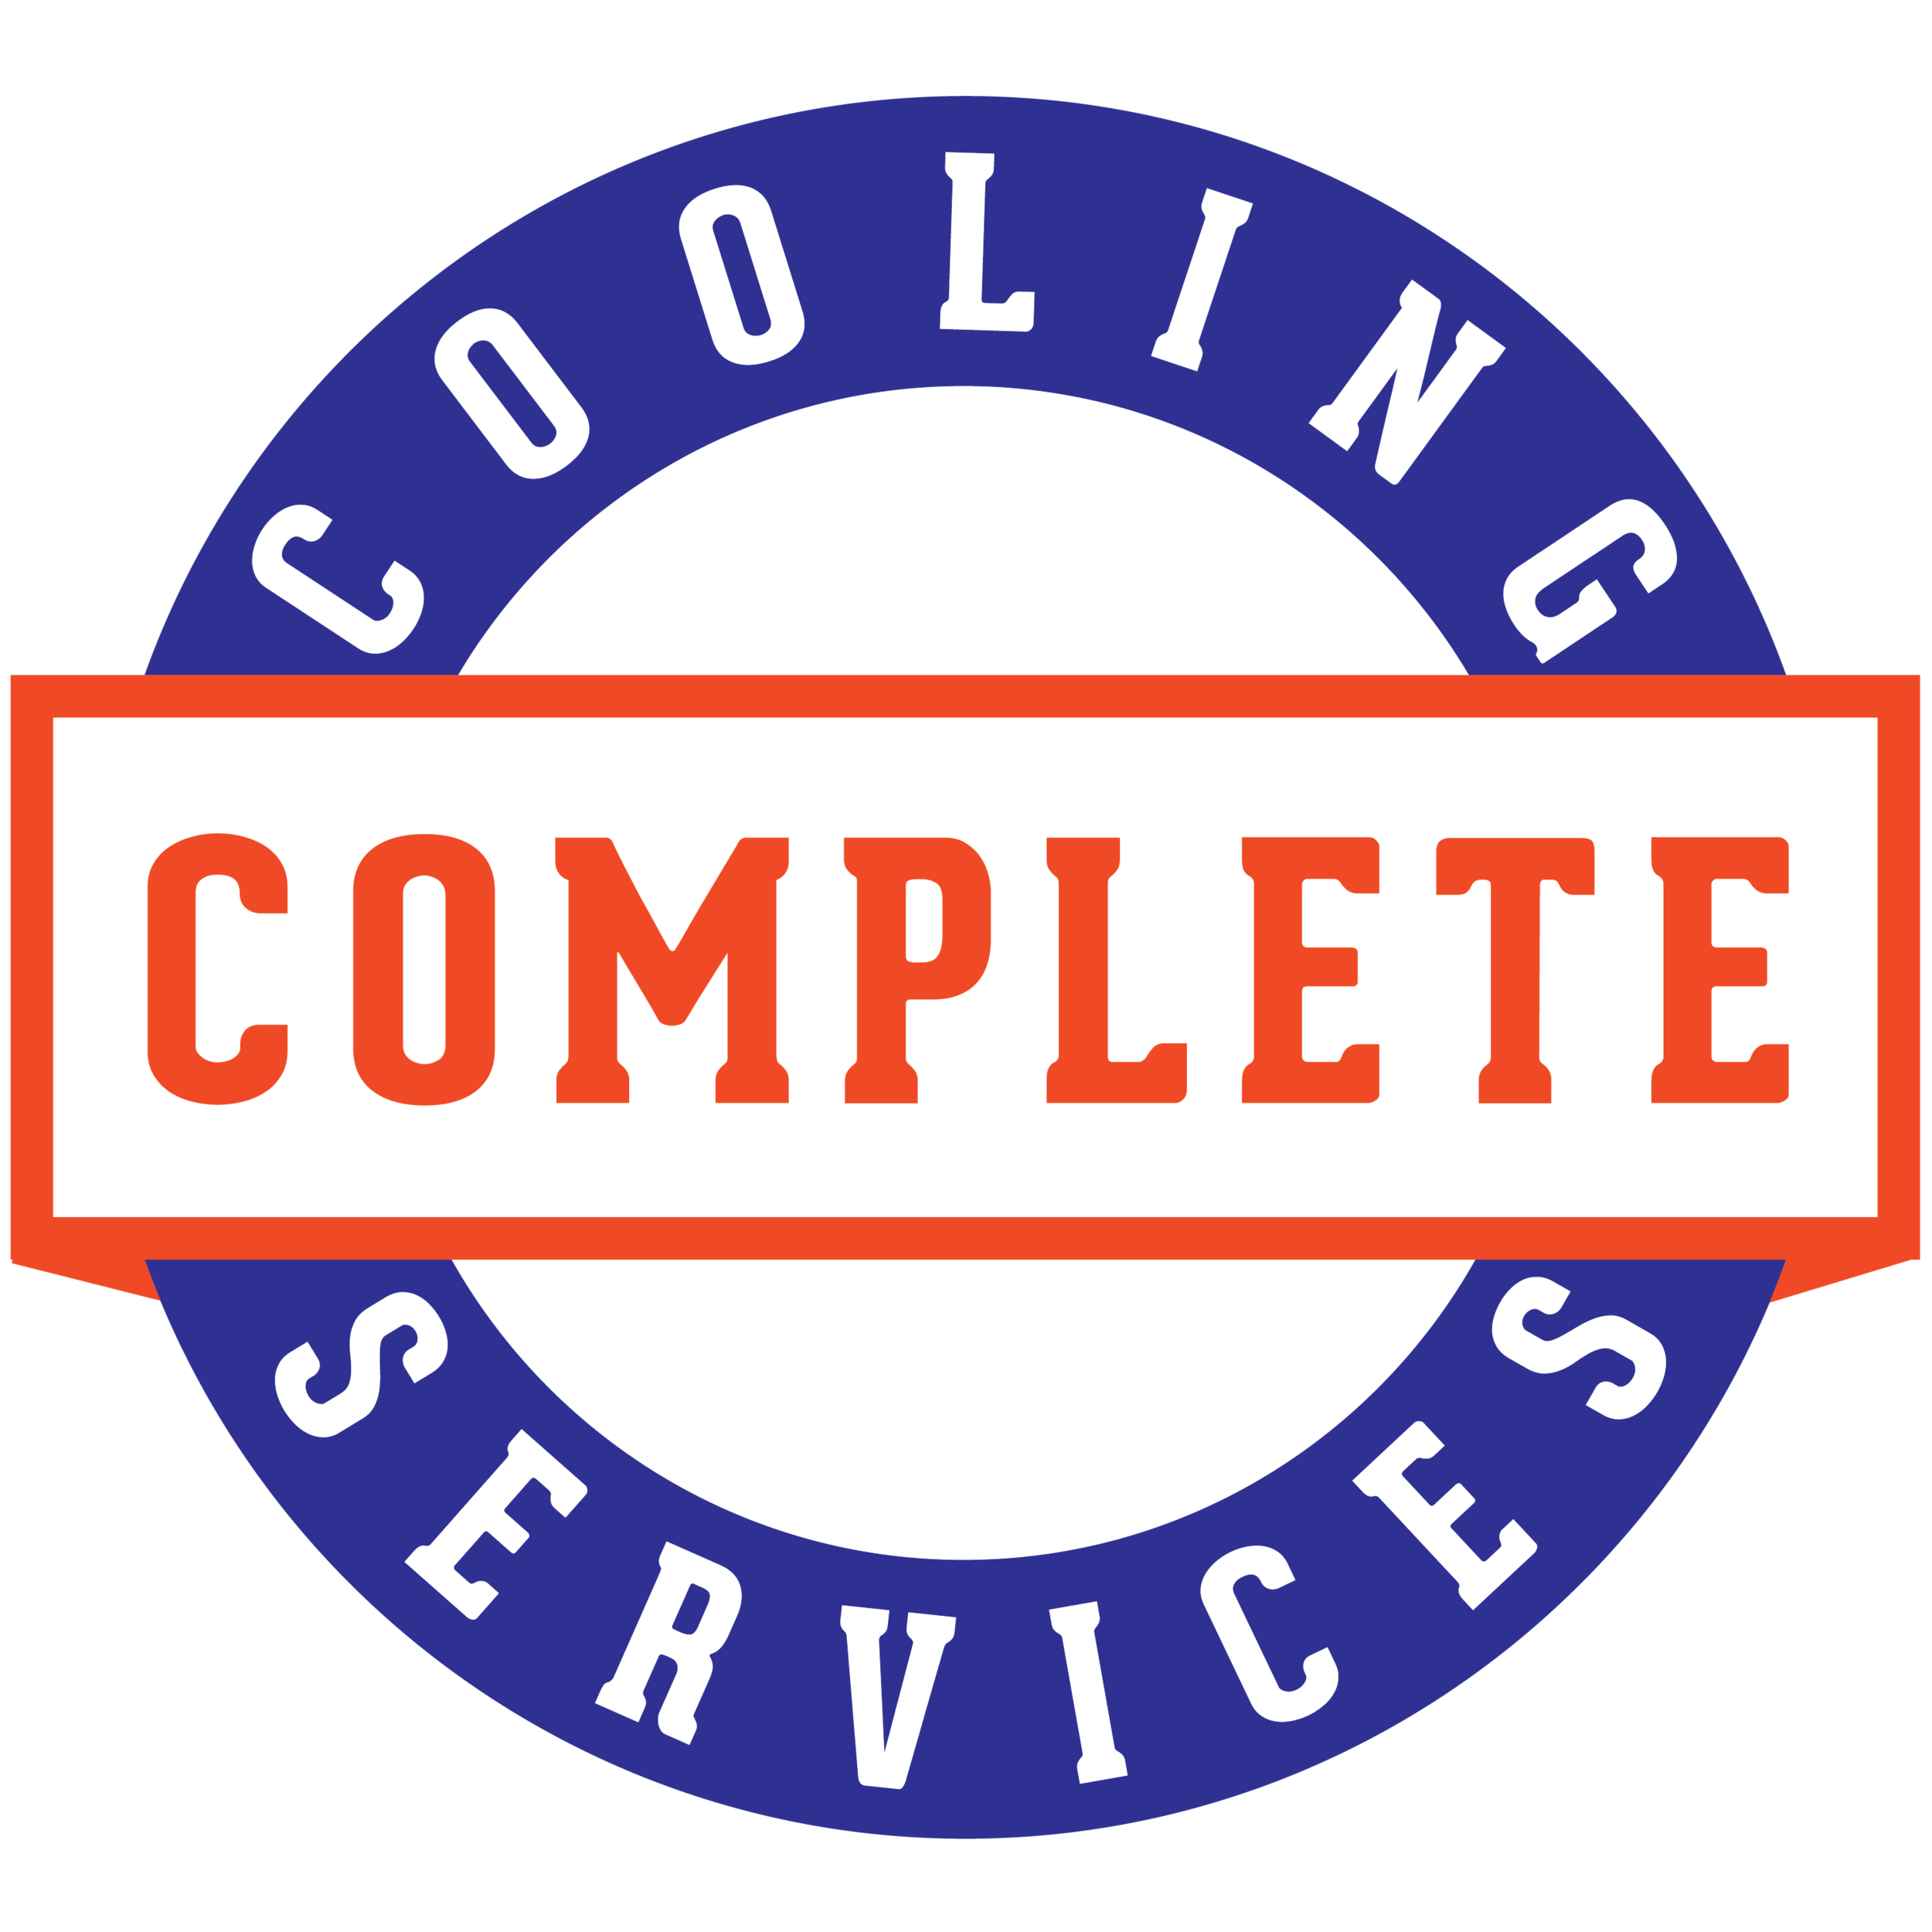 Complete Cooling Services